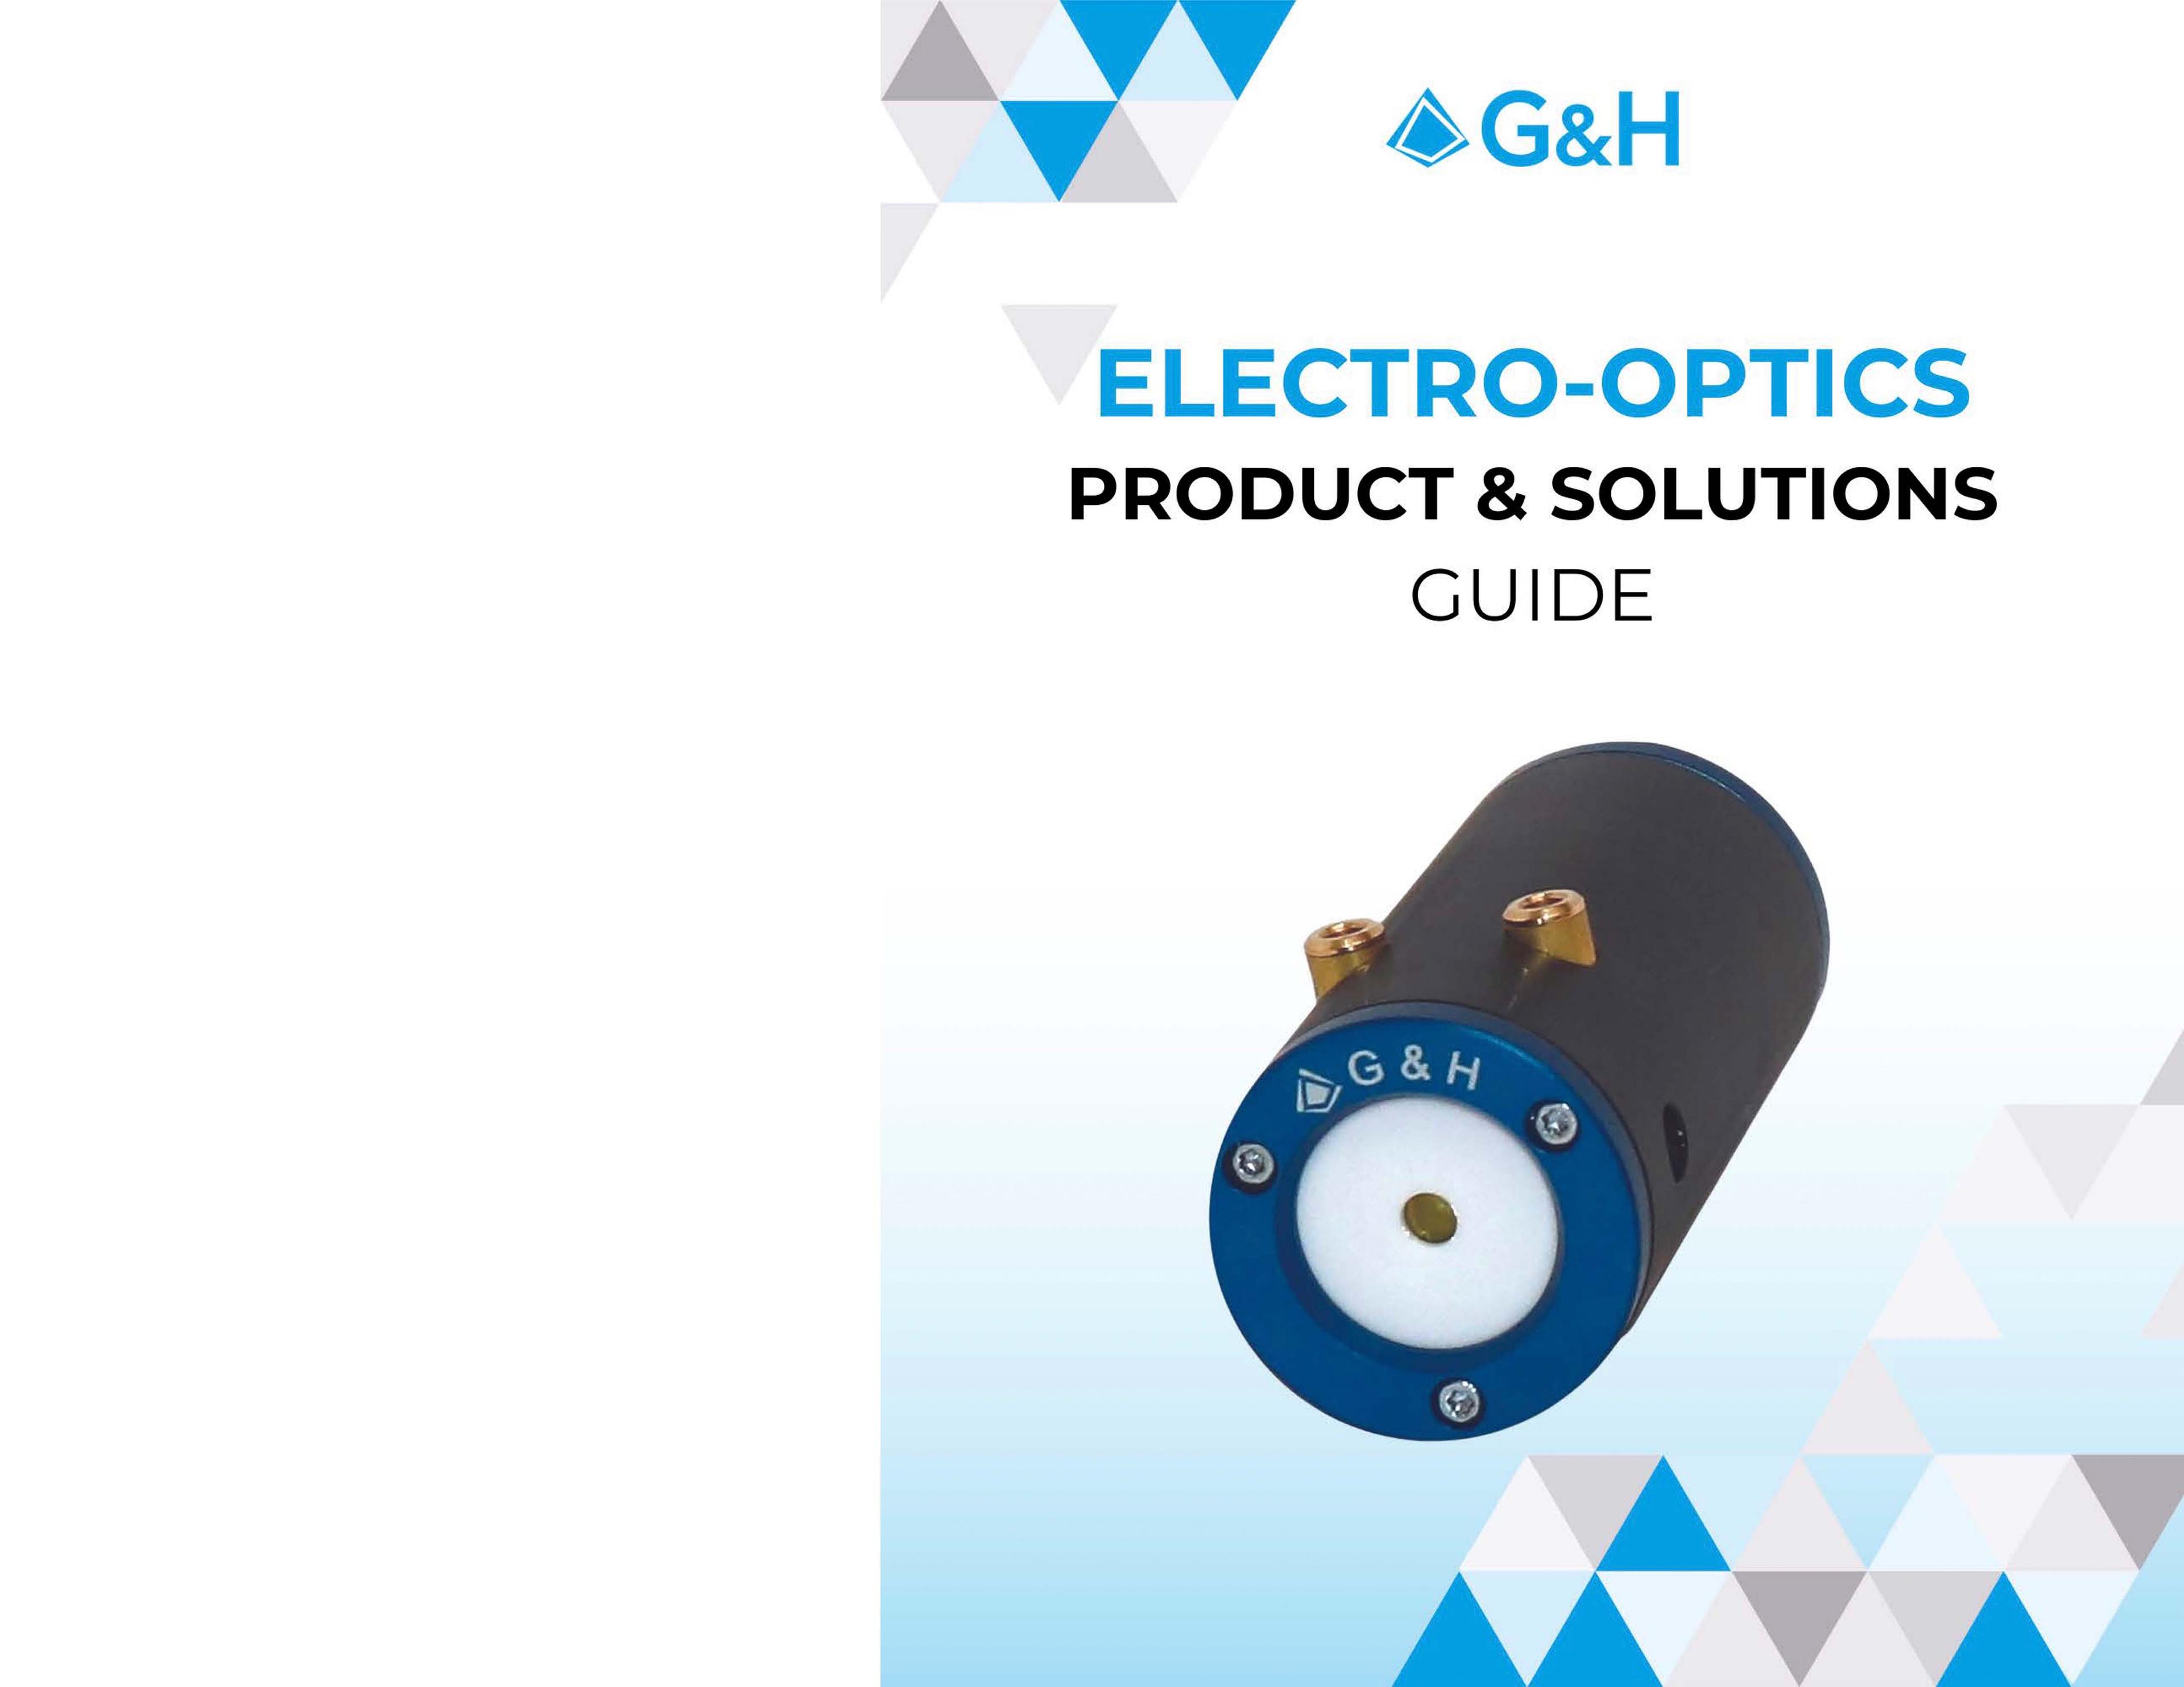 G&H Product & Solutions Guide - Electro-Optics Page 01